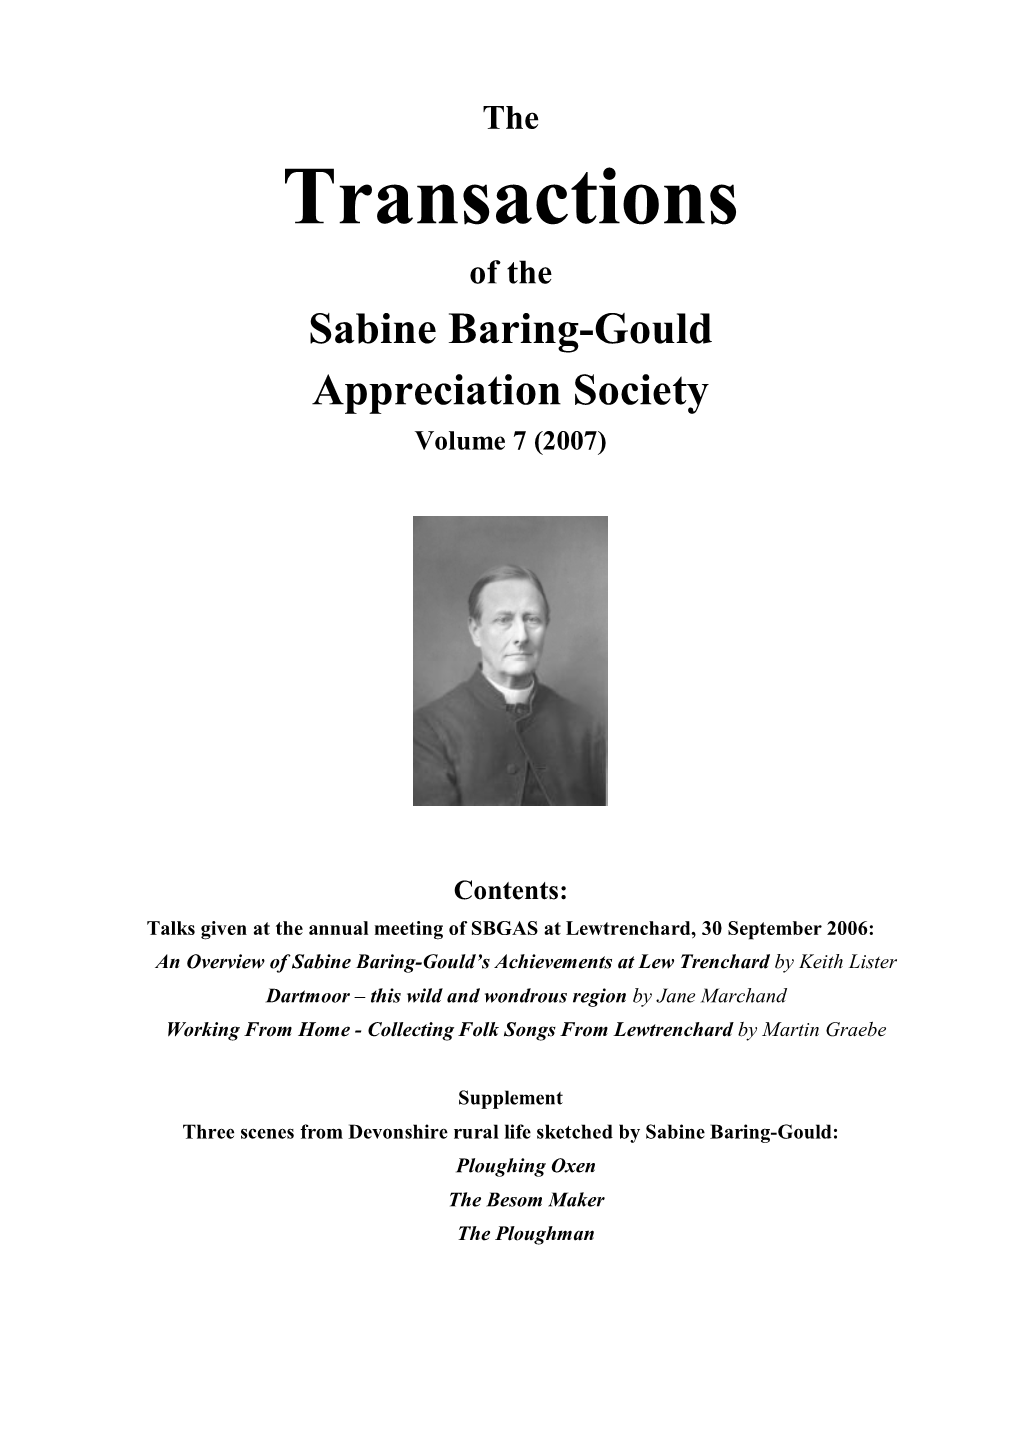 Transactions of the Sabine Baring-Gould Appreciation Society Volume 7 (2007)